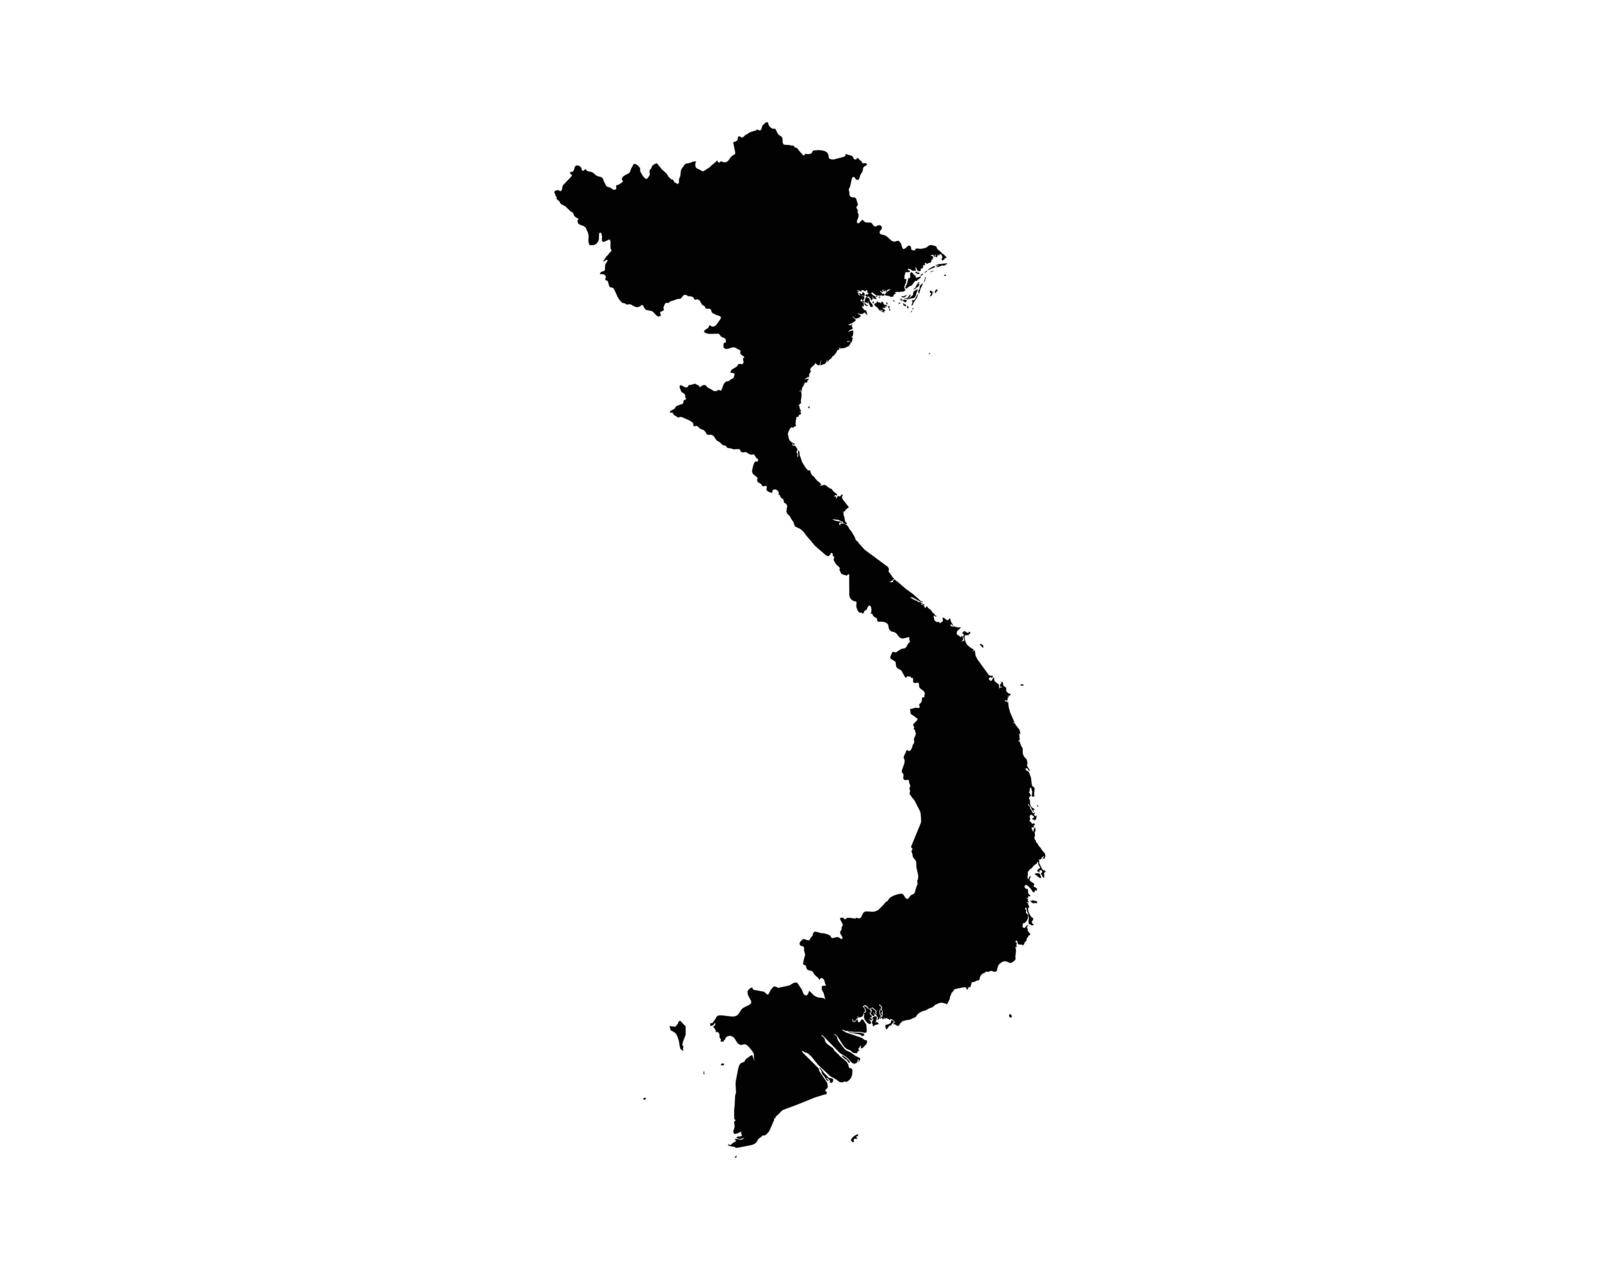 Vietnam Map. Vietnamese Country Map. Black and White National Nation Geography Outline Border Boundary Territory Shape Vector Illustration EPS Clipart